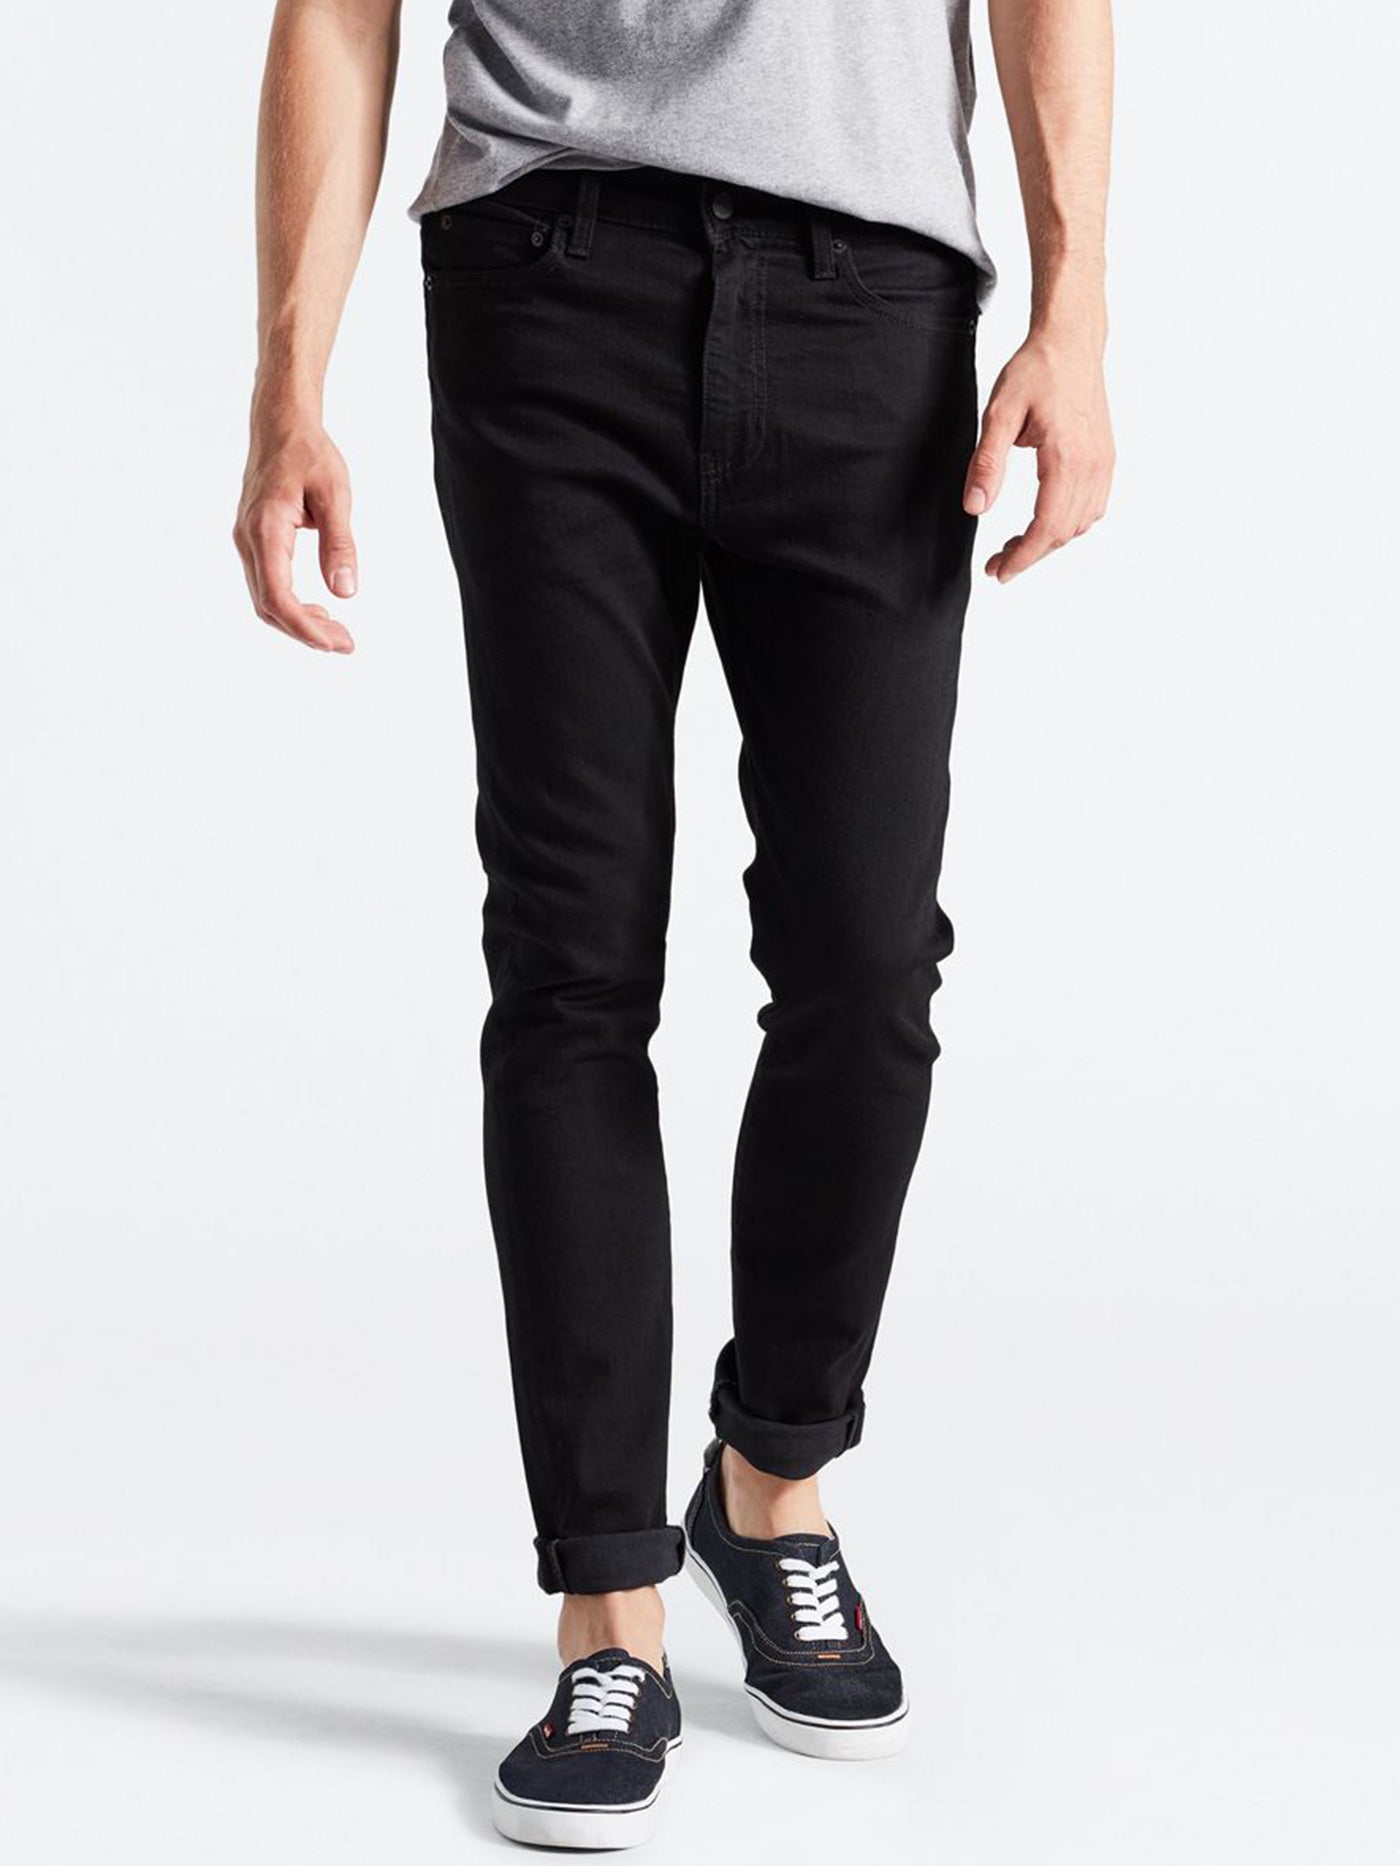 Levis 510 Skinny Fit Jeans | EMPIRE